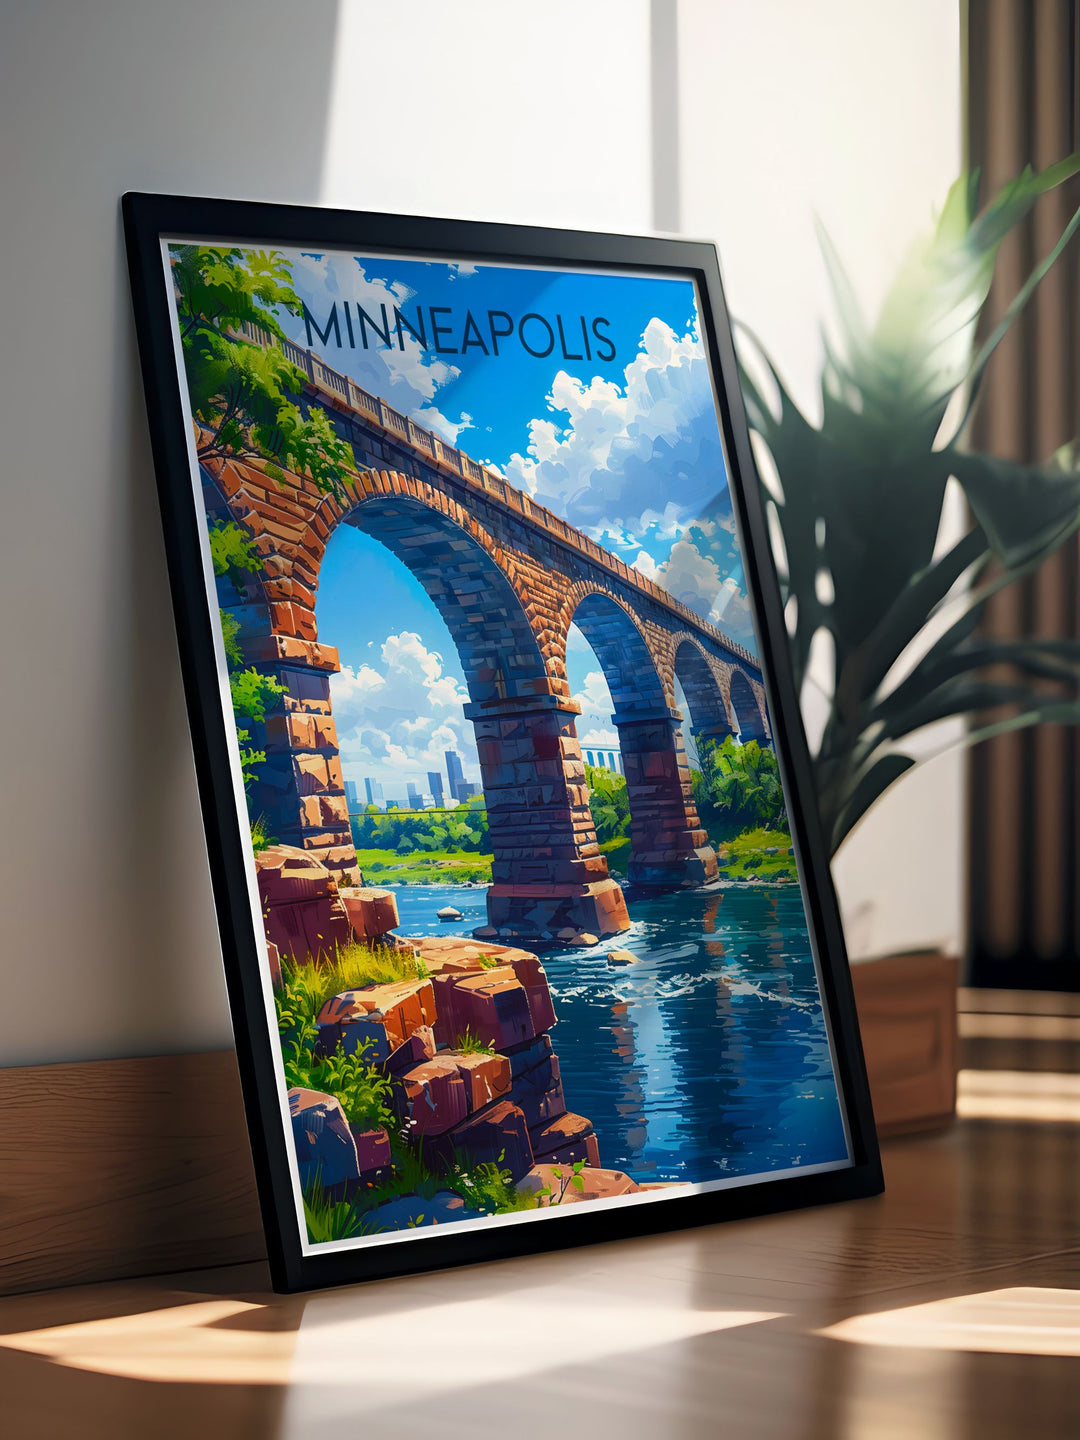 This detailed poster of the Stone Arch Bridge illustrates its architectural beauty and historic significance, making it an excellent addition to any art collection celebrating urban elegance.